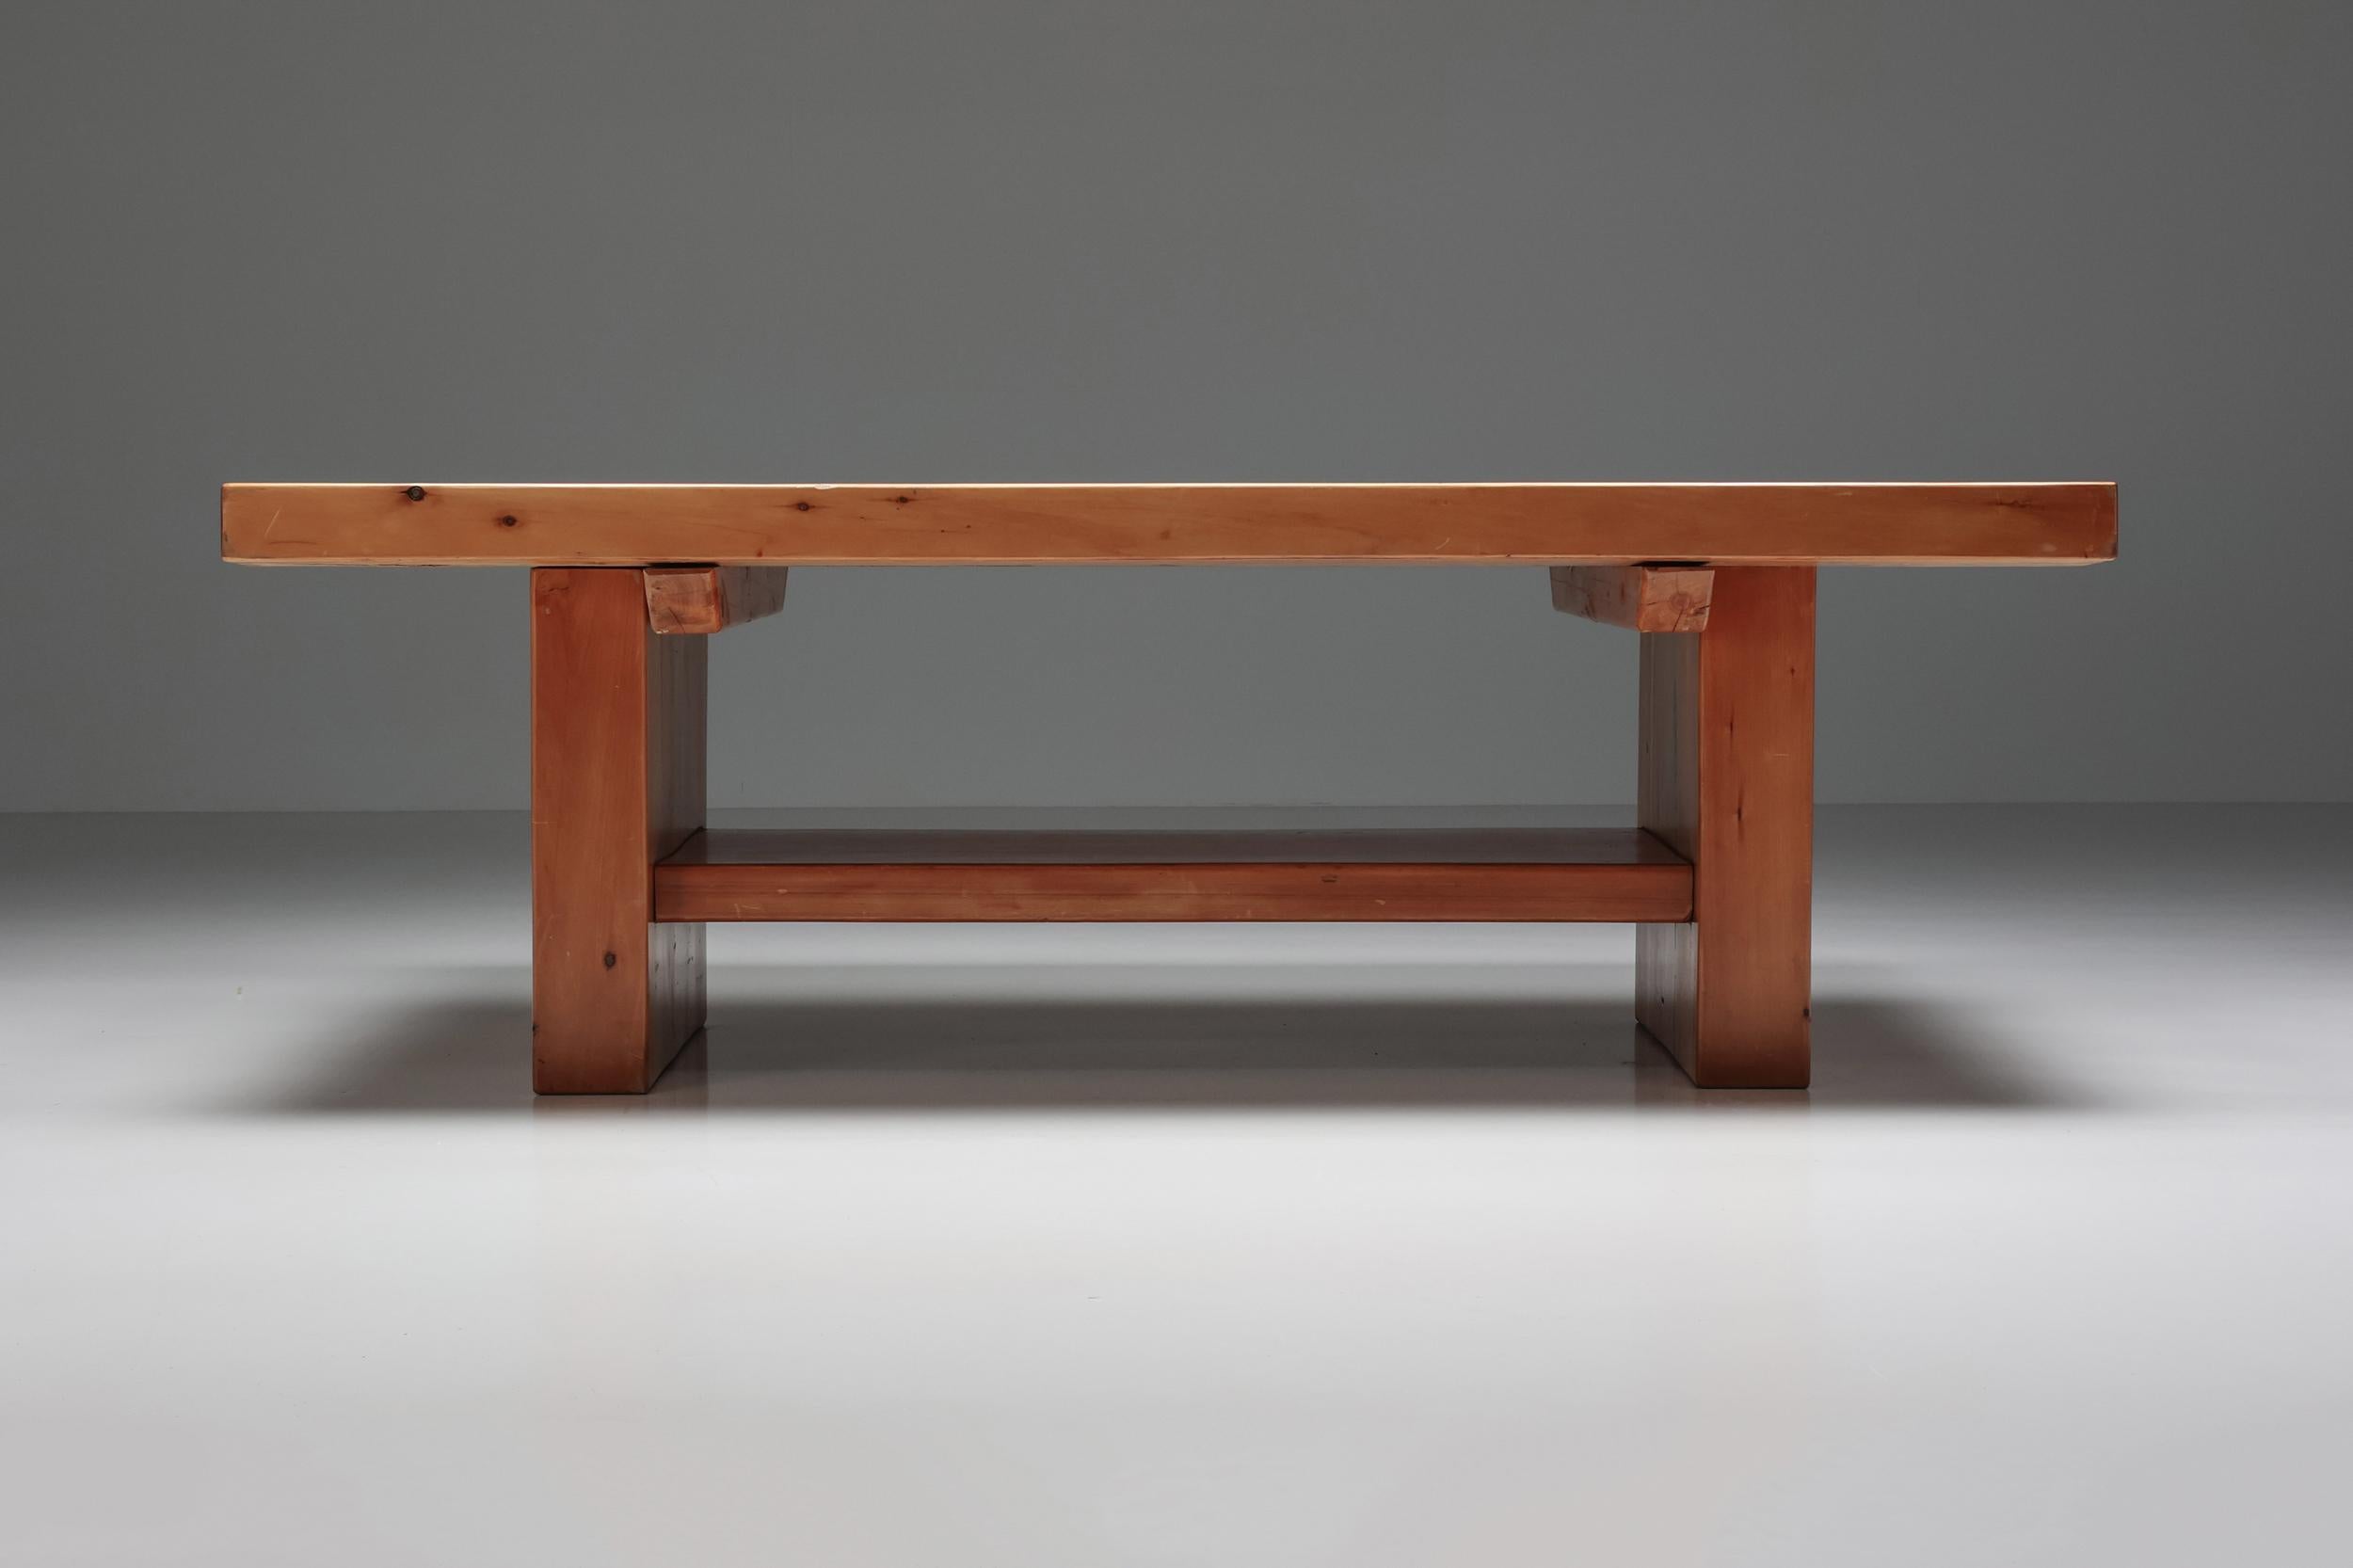 Chapo; French furniture design; Craftsmanship; 1960s; Dining table; Solid elmwood; Donald Judd; Pierre Chapo; Marcel Breuer; Bahaus; Thonet; Rustic

Rustic French dining table in solid elmwood. The visible construction elements remind us of the